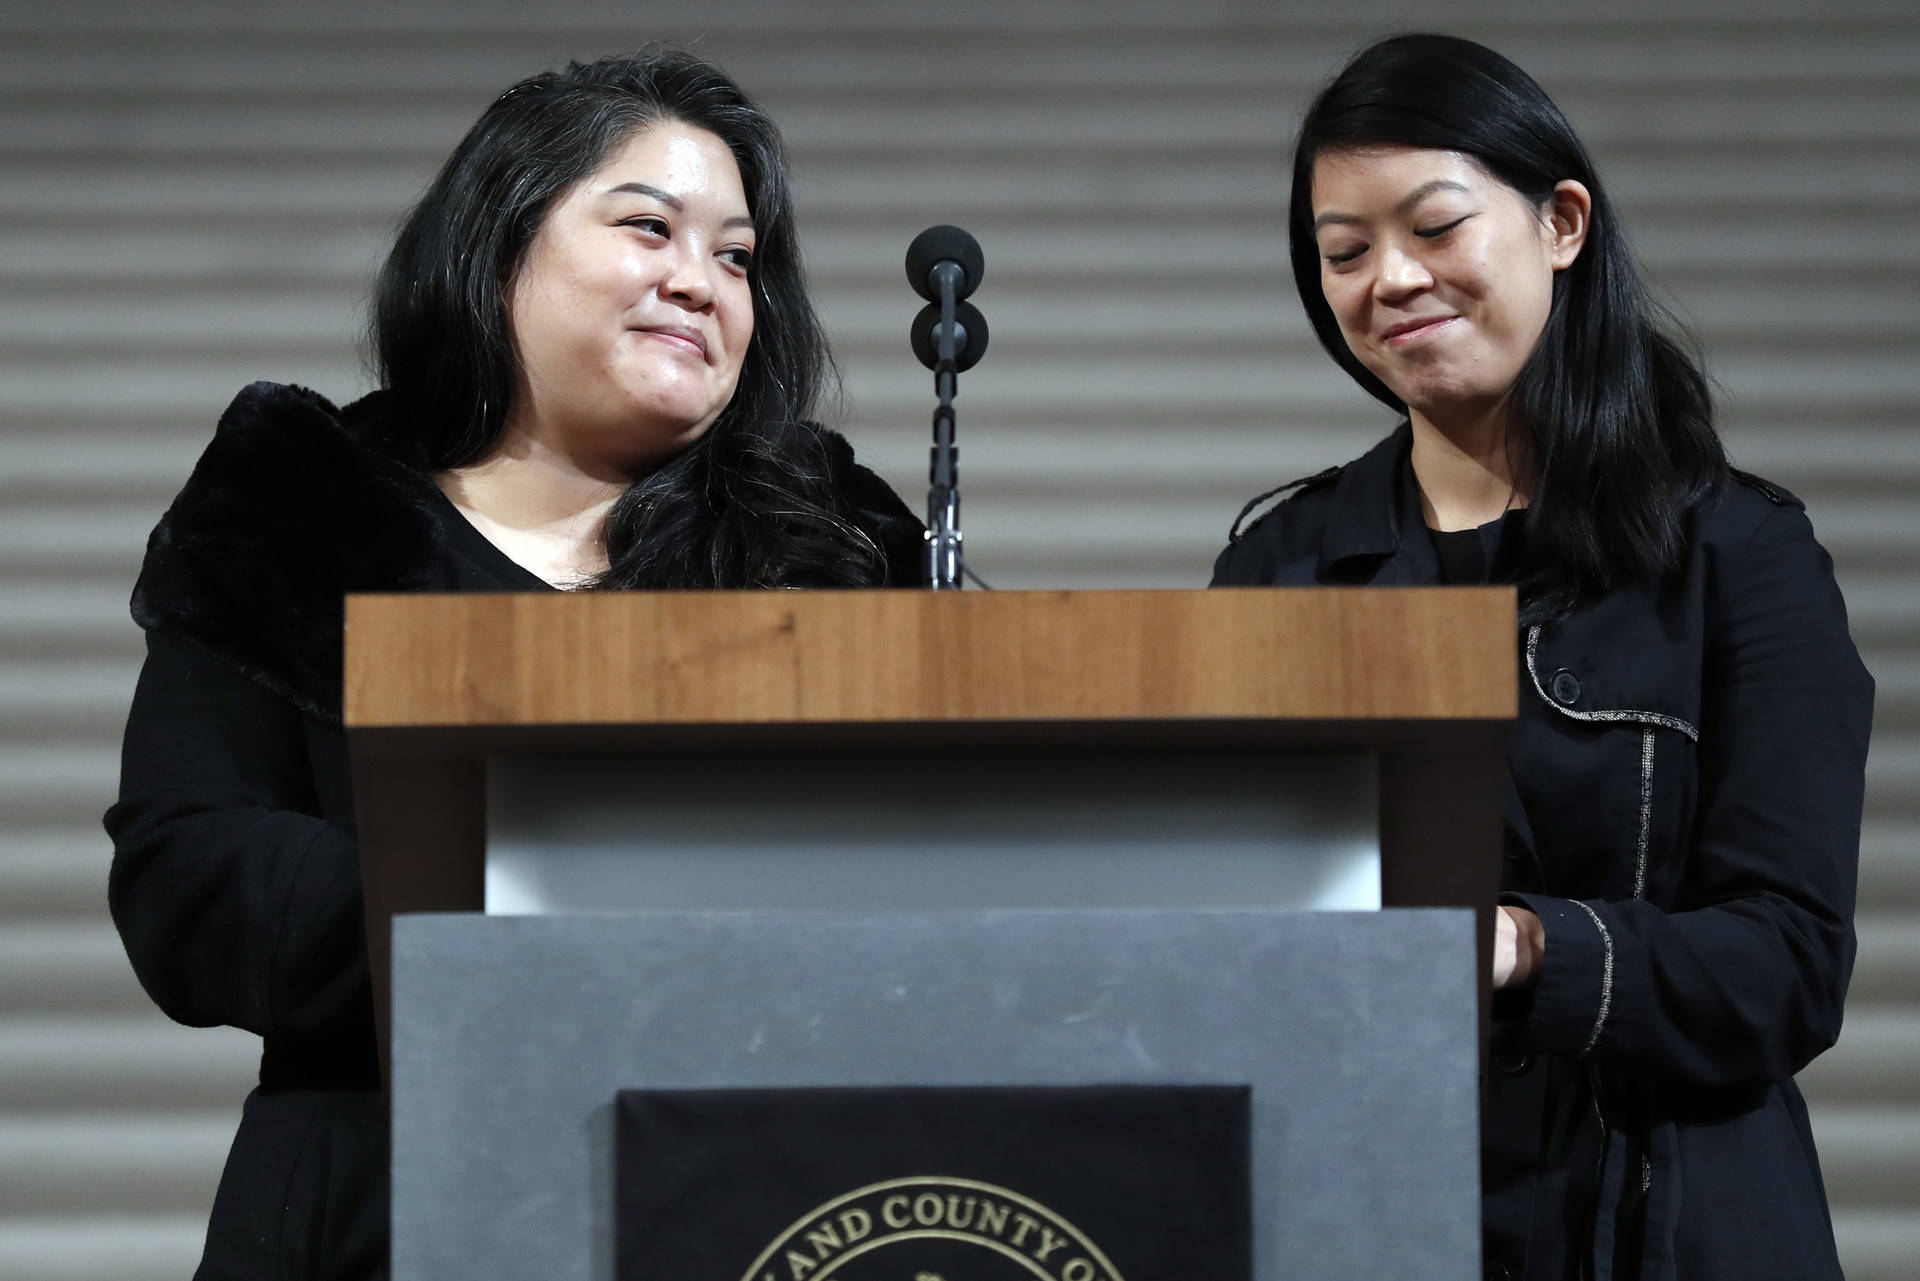 Ed Lee's daughters, Tania and Brianna Lee, speak during a service celebrating the life of Mayor Edwin M. Lee at San Francisco City Hall on Sunday, Dec. 17, 2017. Scott Strazzante/San Francisco Chronicle via AP, Pool